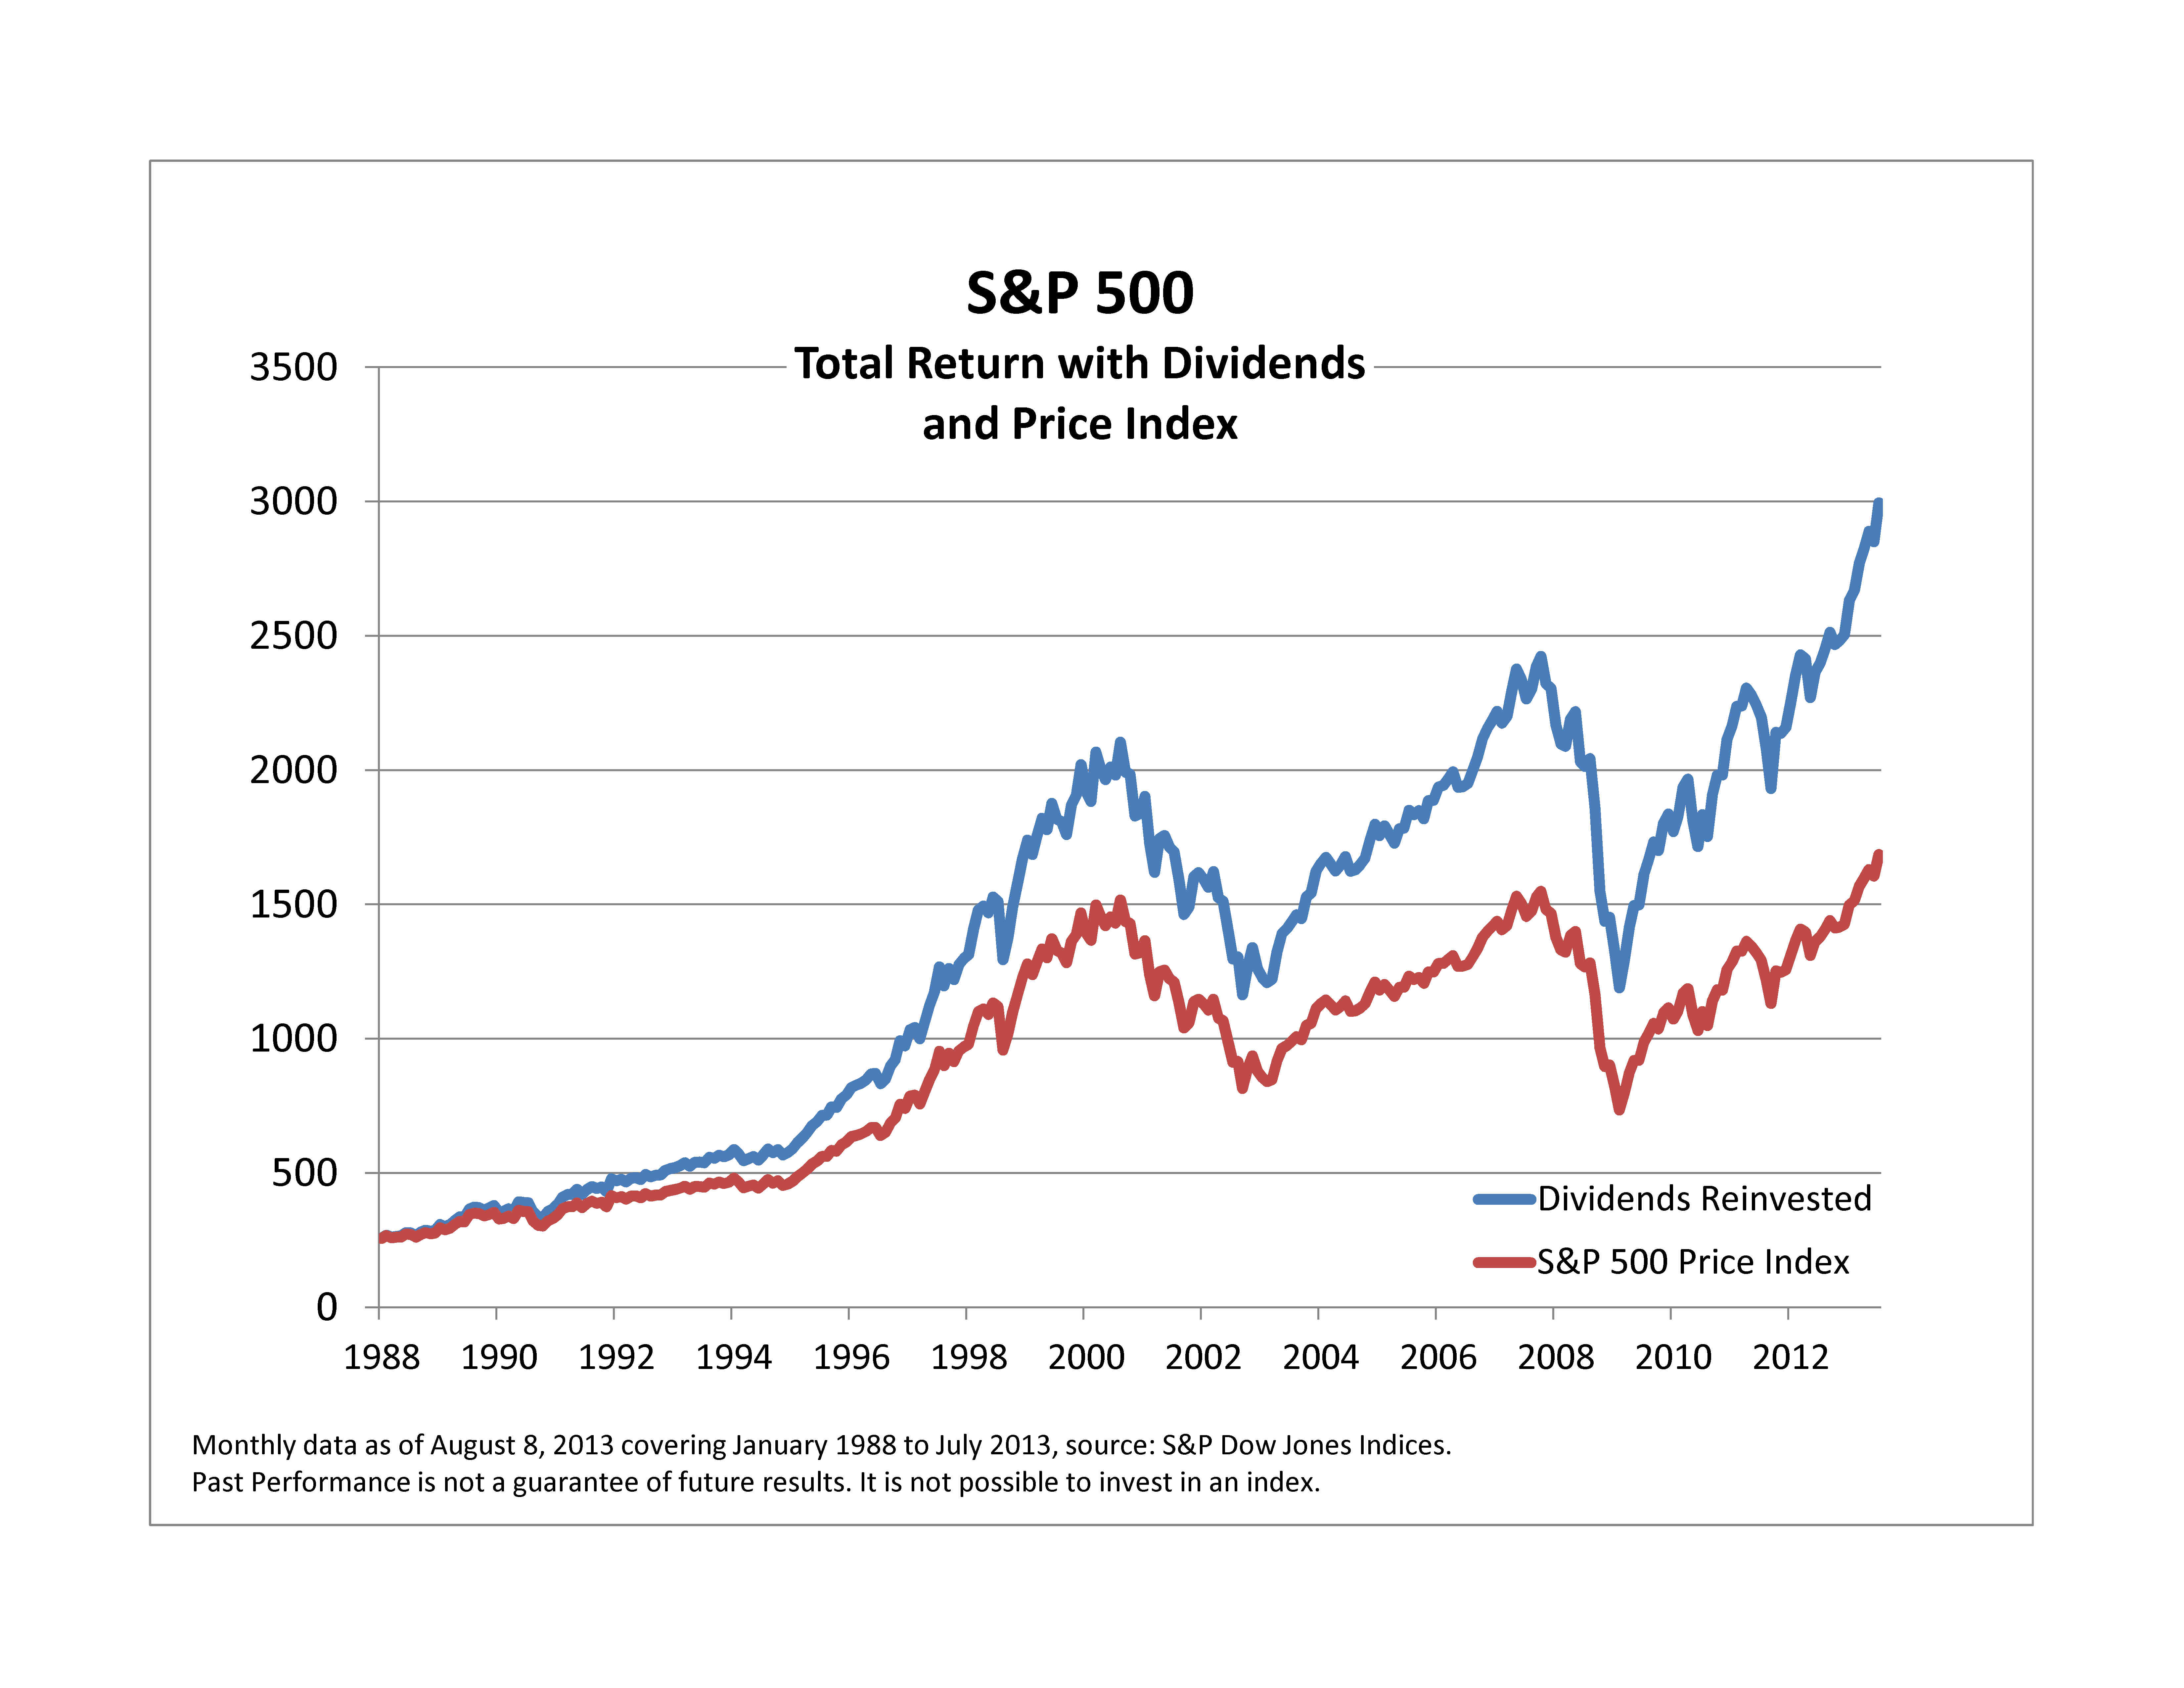 How is the S&P 500 yearly performance calculated?